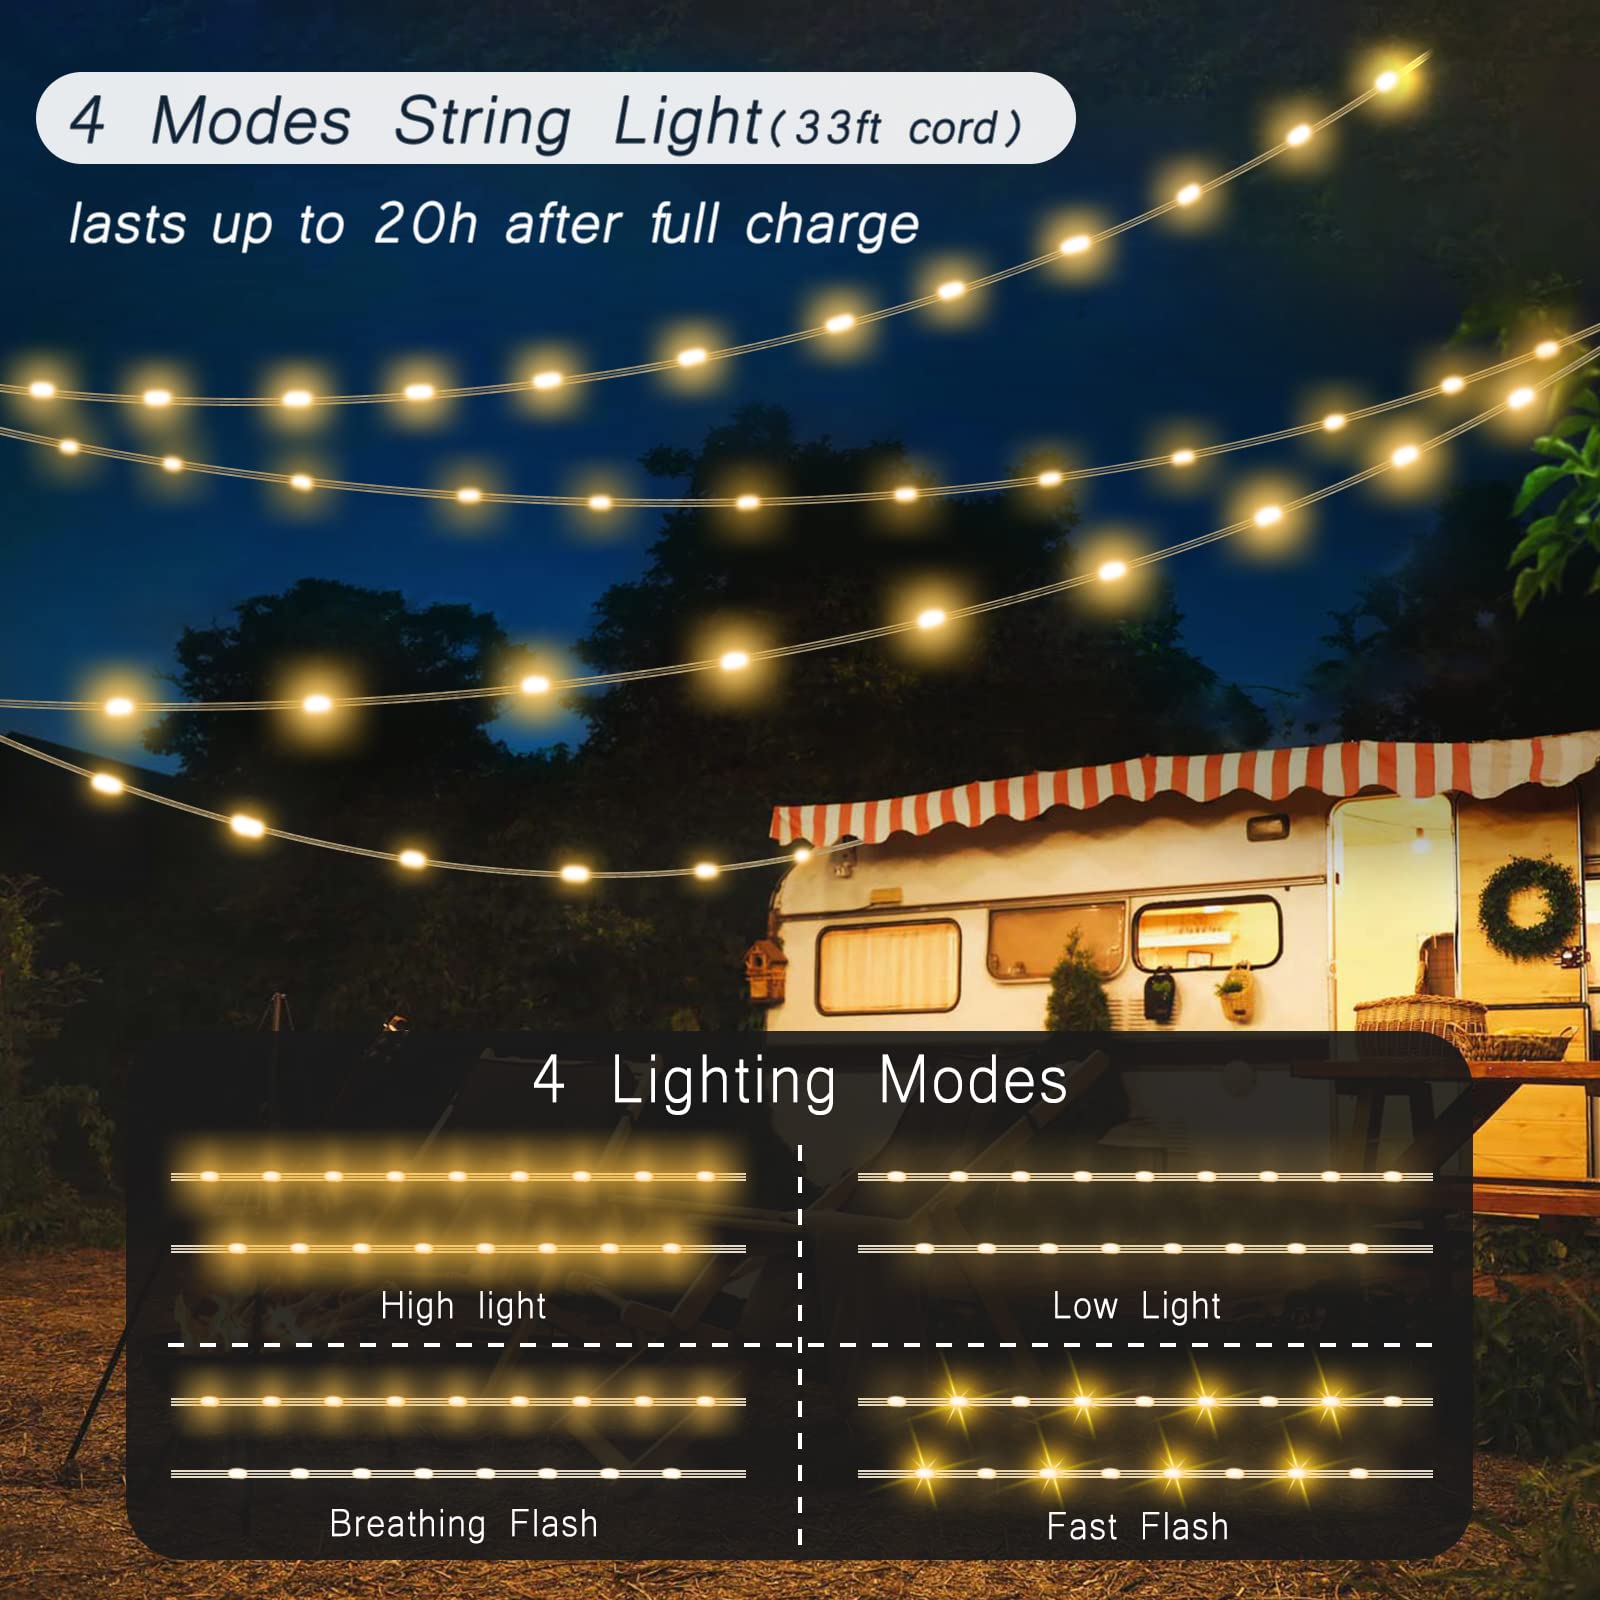 Camping String Lights-Camping Lantern with String Light(33Ft)